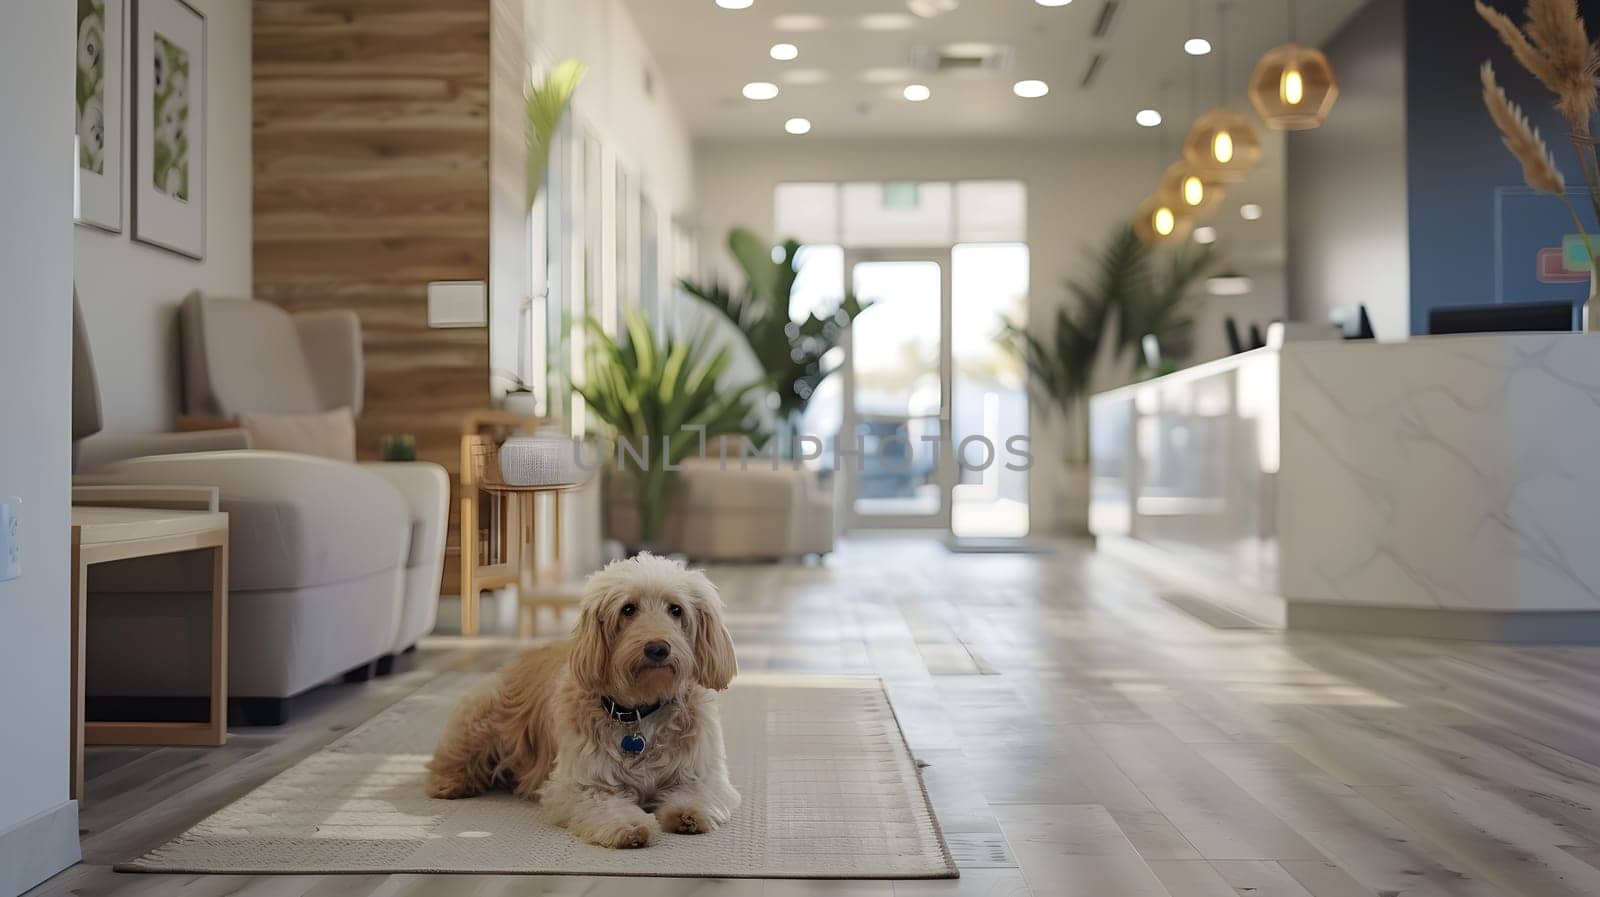 A companion dog is resting on a hardwood floor in a buildings waiting room, surrounded by plants and wood accents